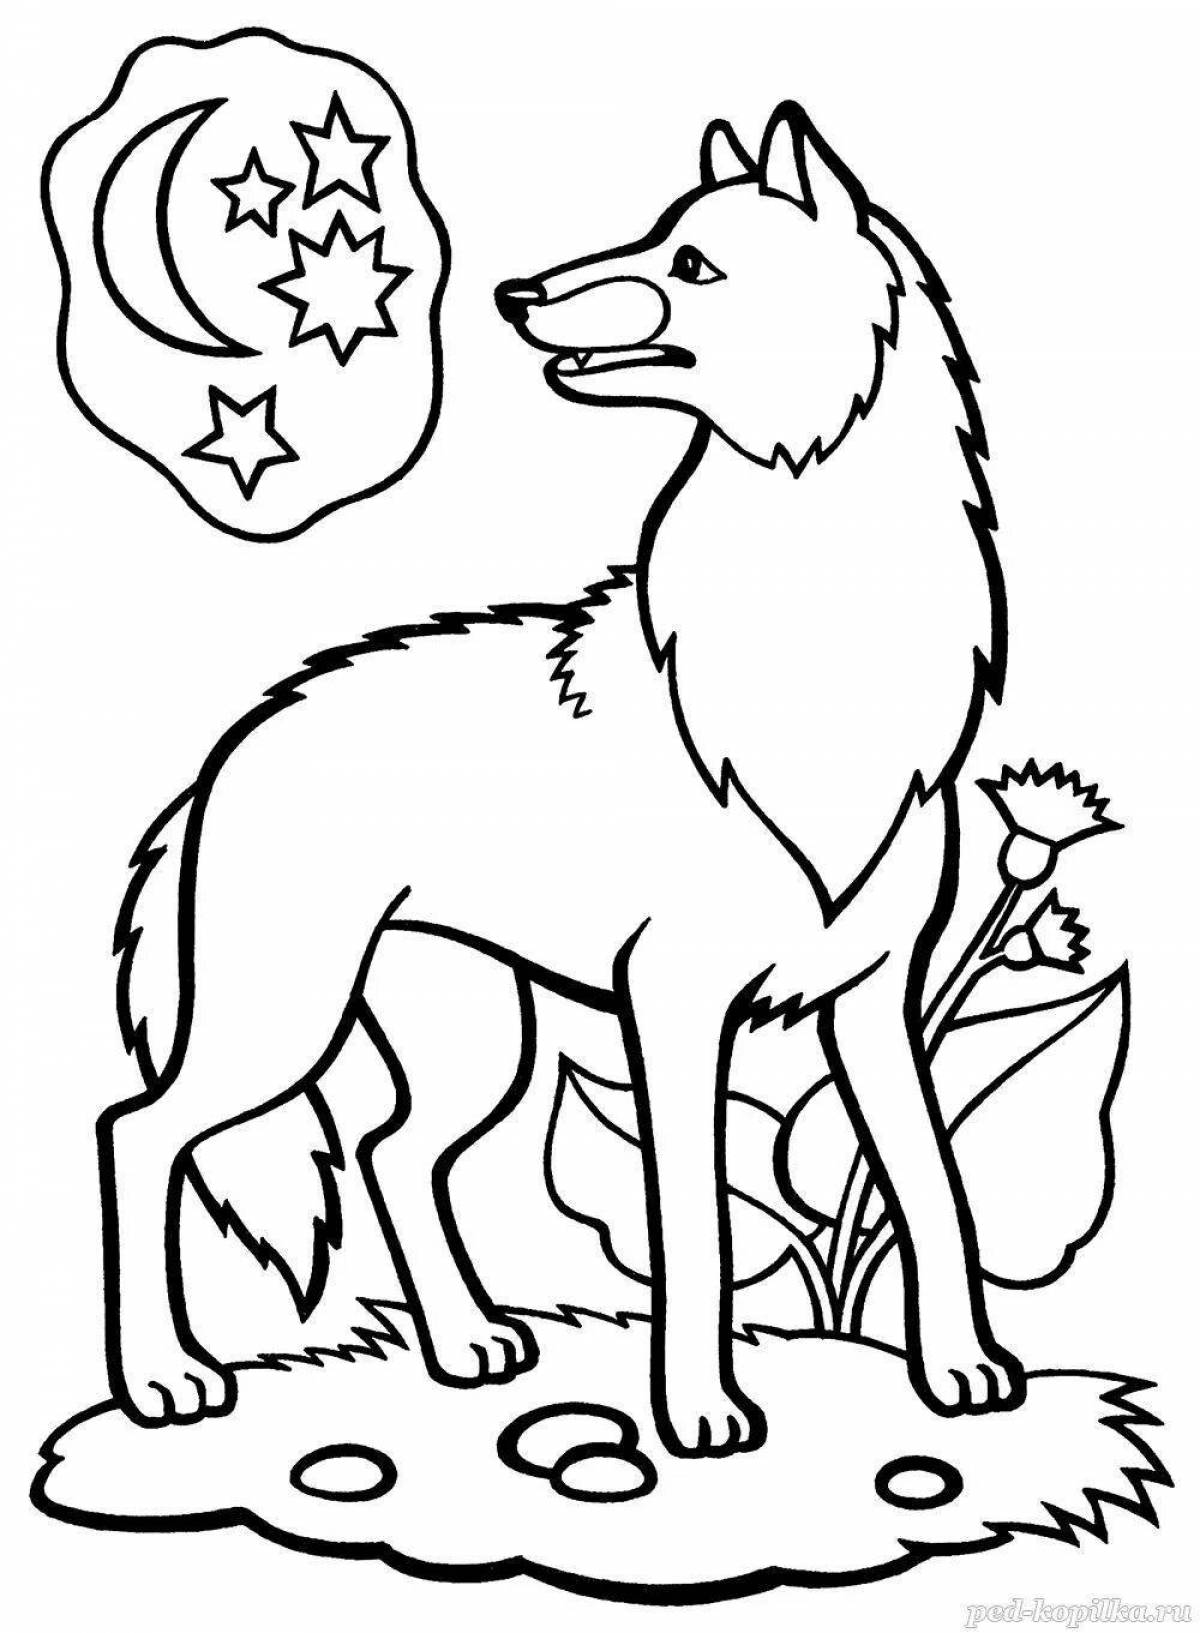 Playful wolf coloring book for children 6-7 years old